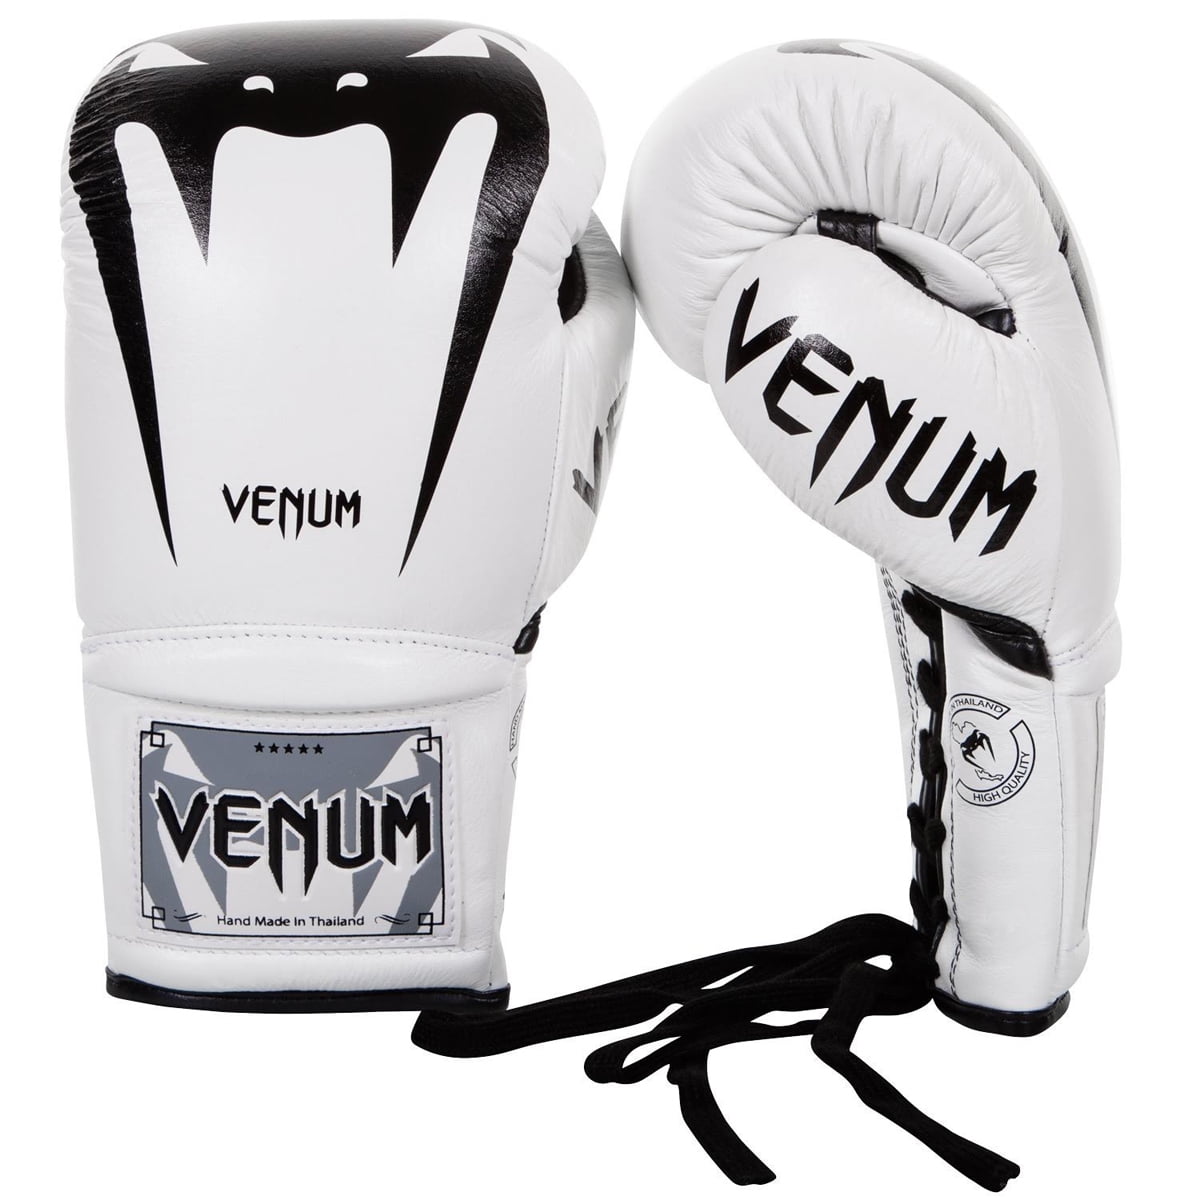 Venum Boxing Gloves Giant 3.0 Nappa Leather White Gold Sparring Training Gloves 